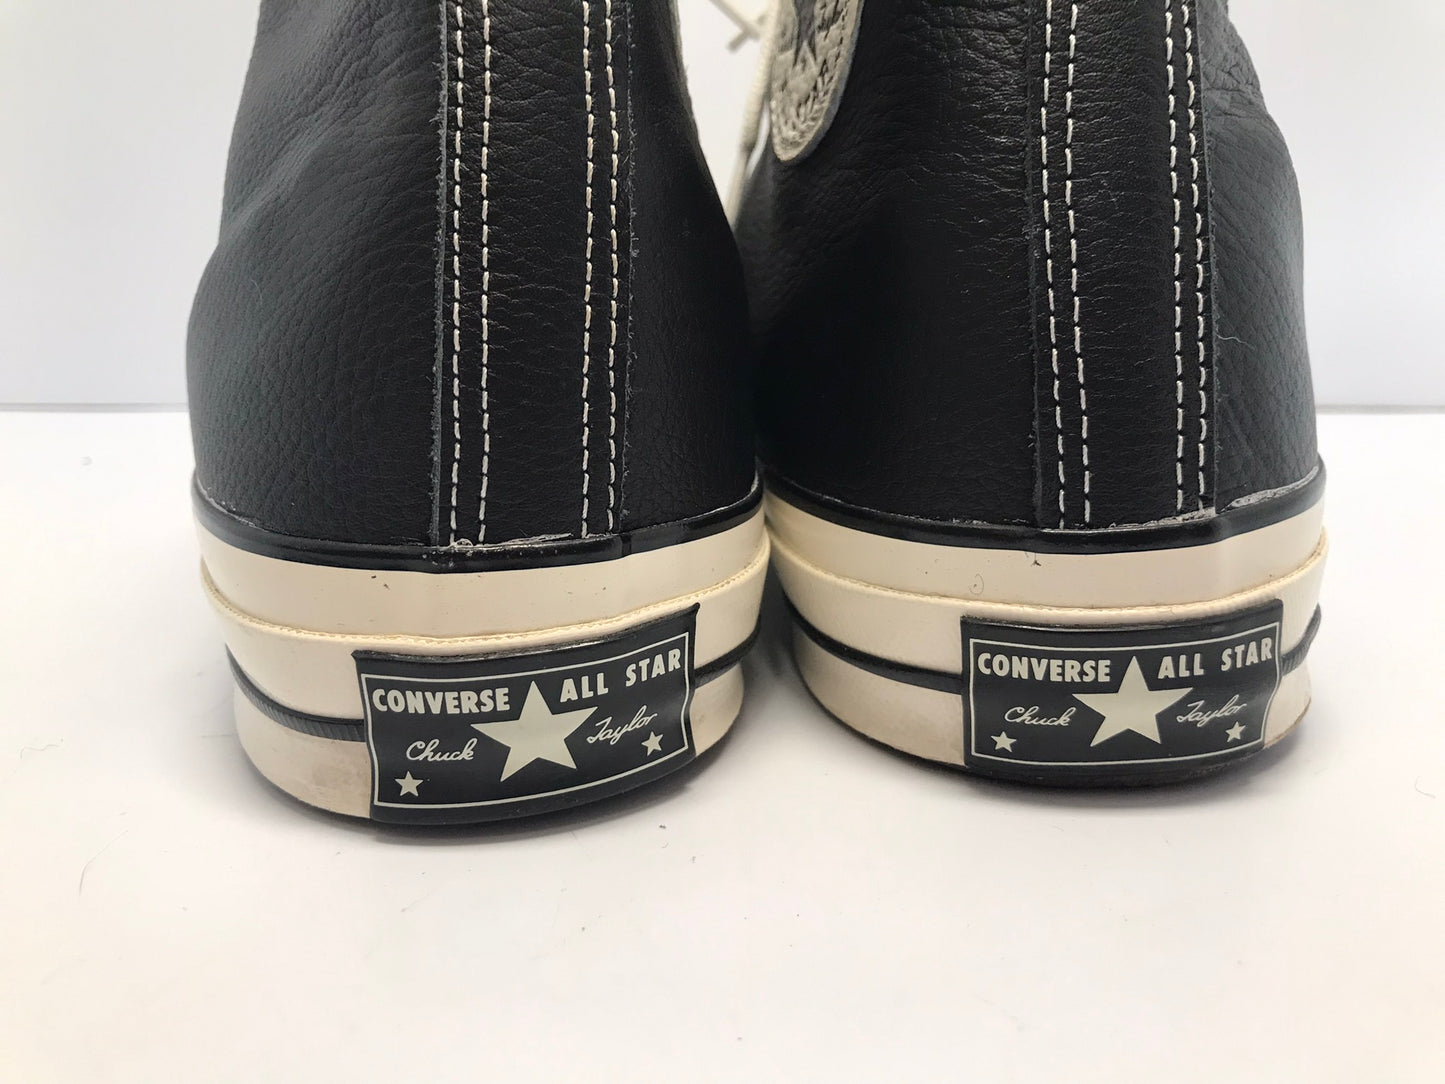 Converse All-Star Chuck Taylors Men's Size 12 High Tops Leather With Faux Fur Insides Like New